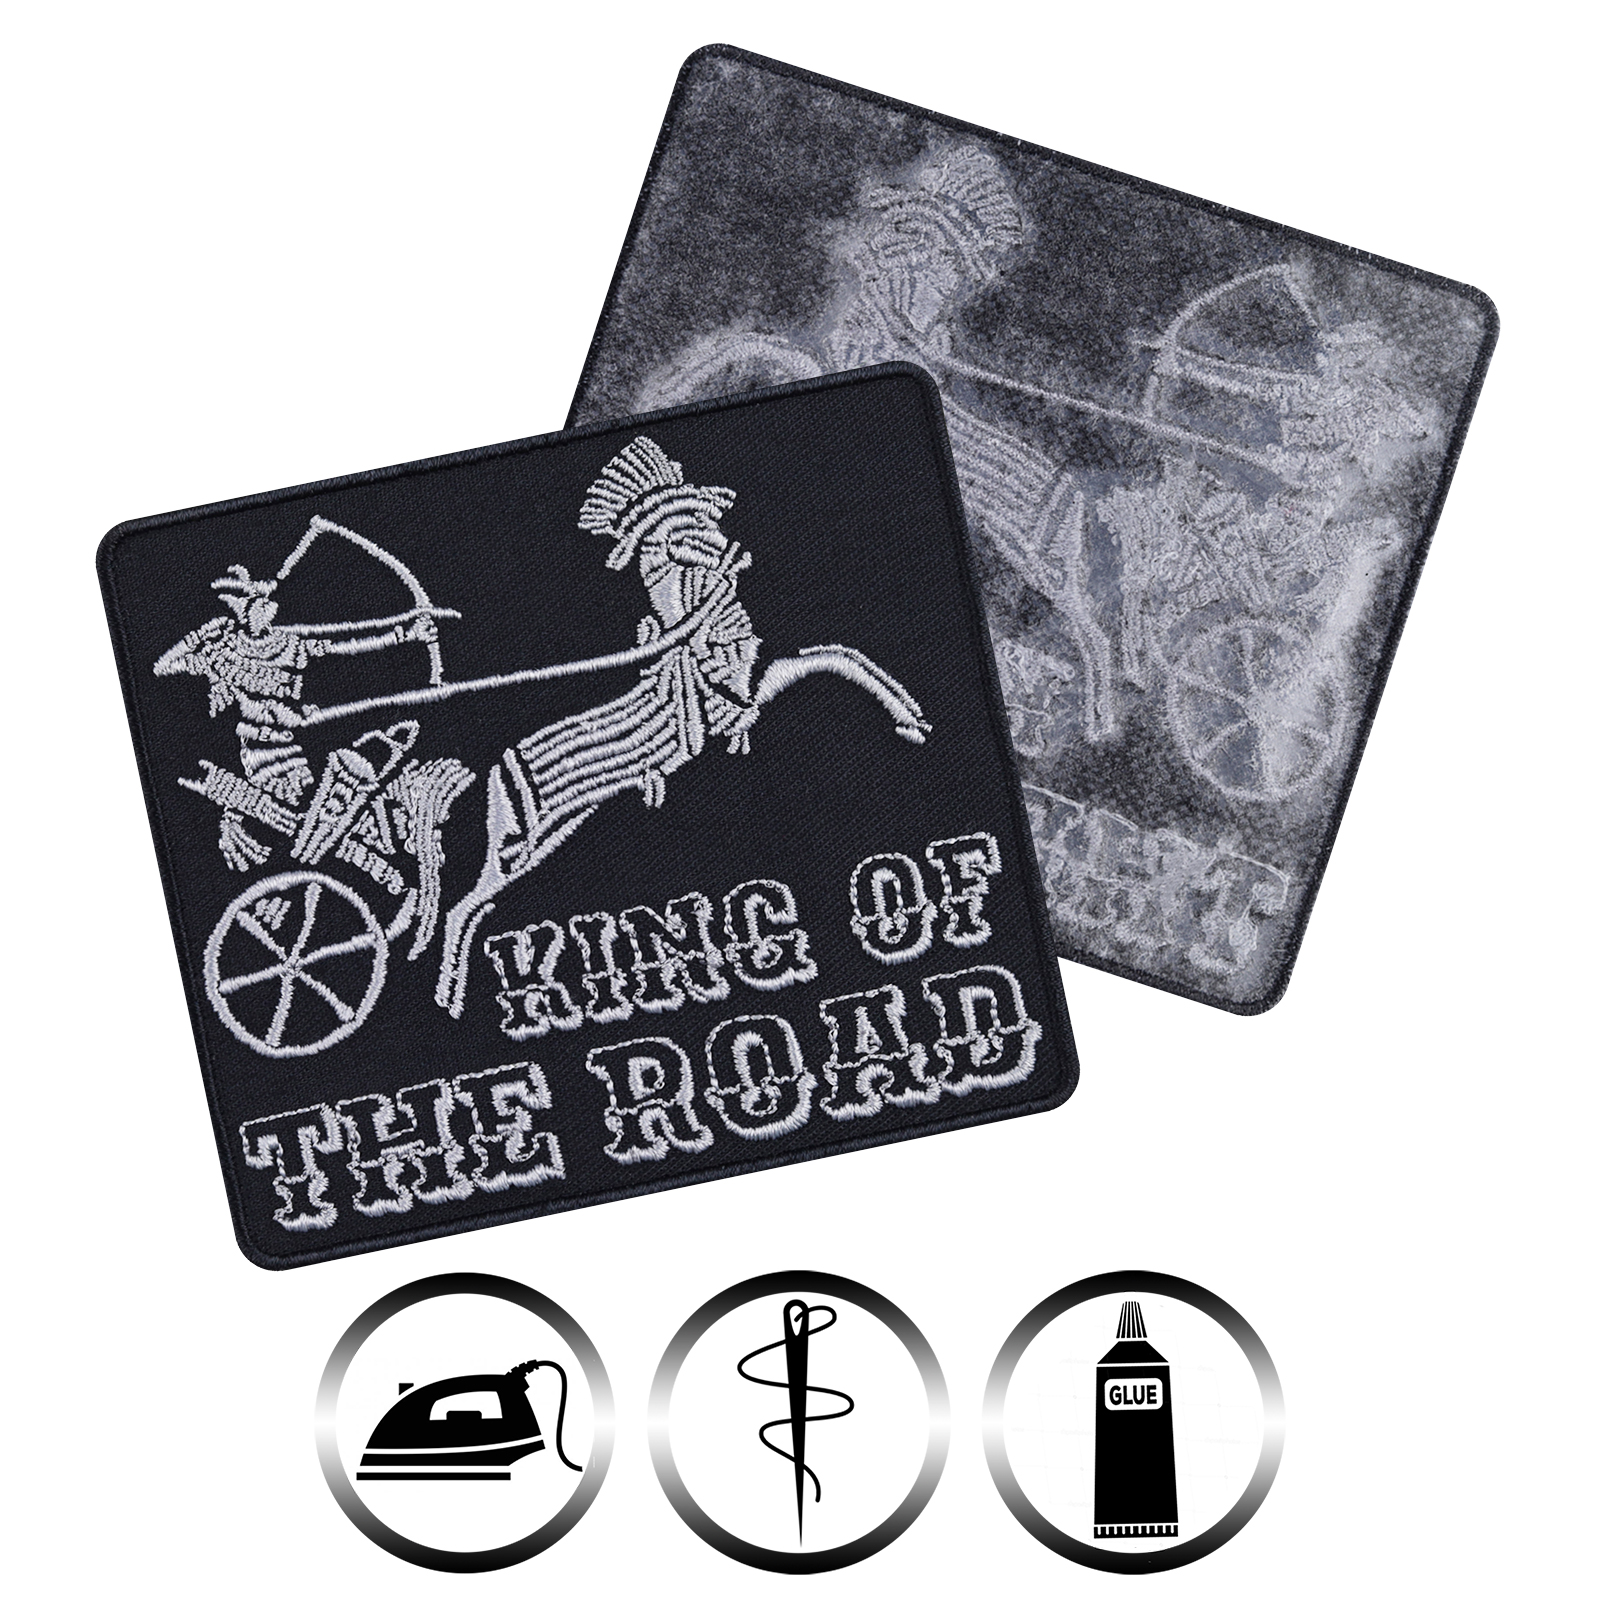 King of the road - Patch